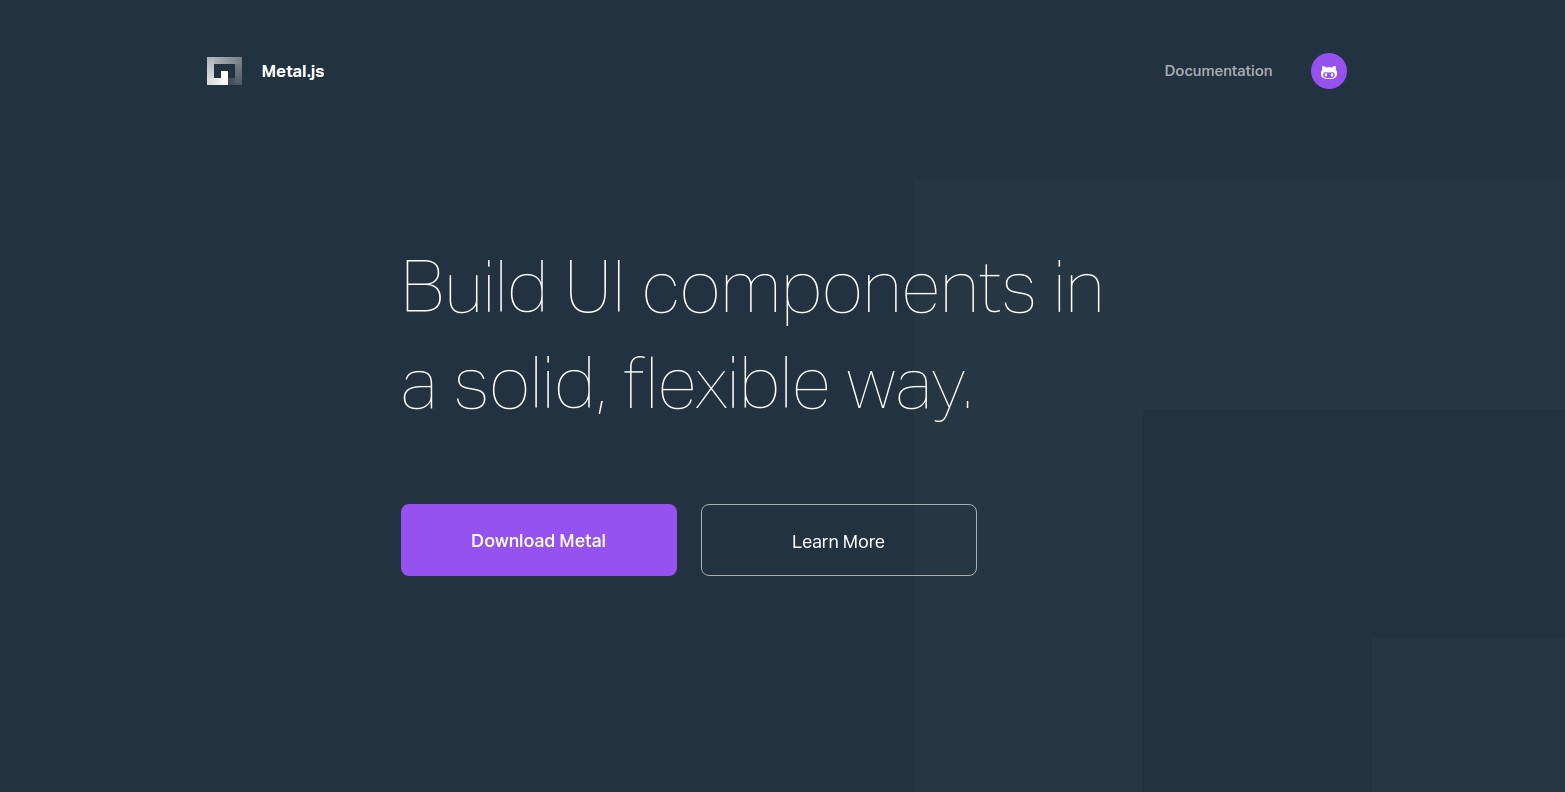 Figure 1: Metal.js is a new framework for building UI components.